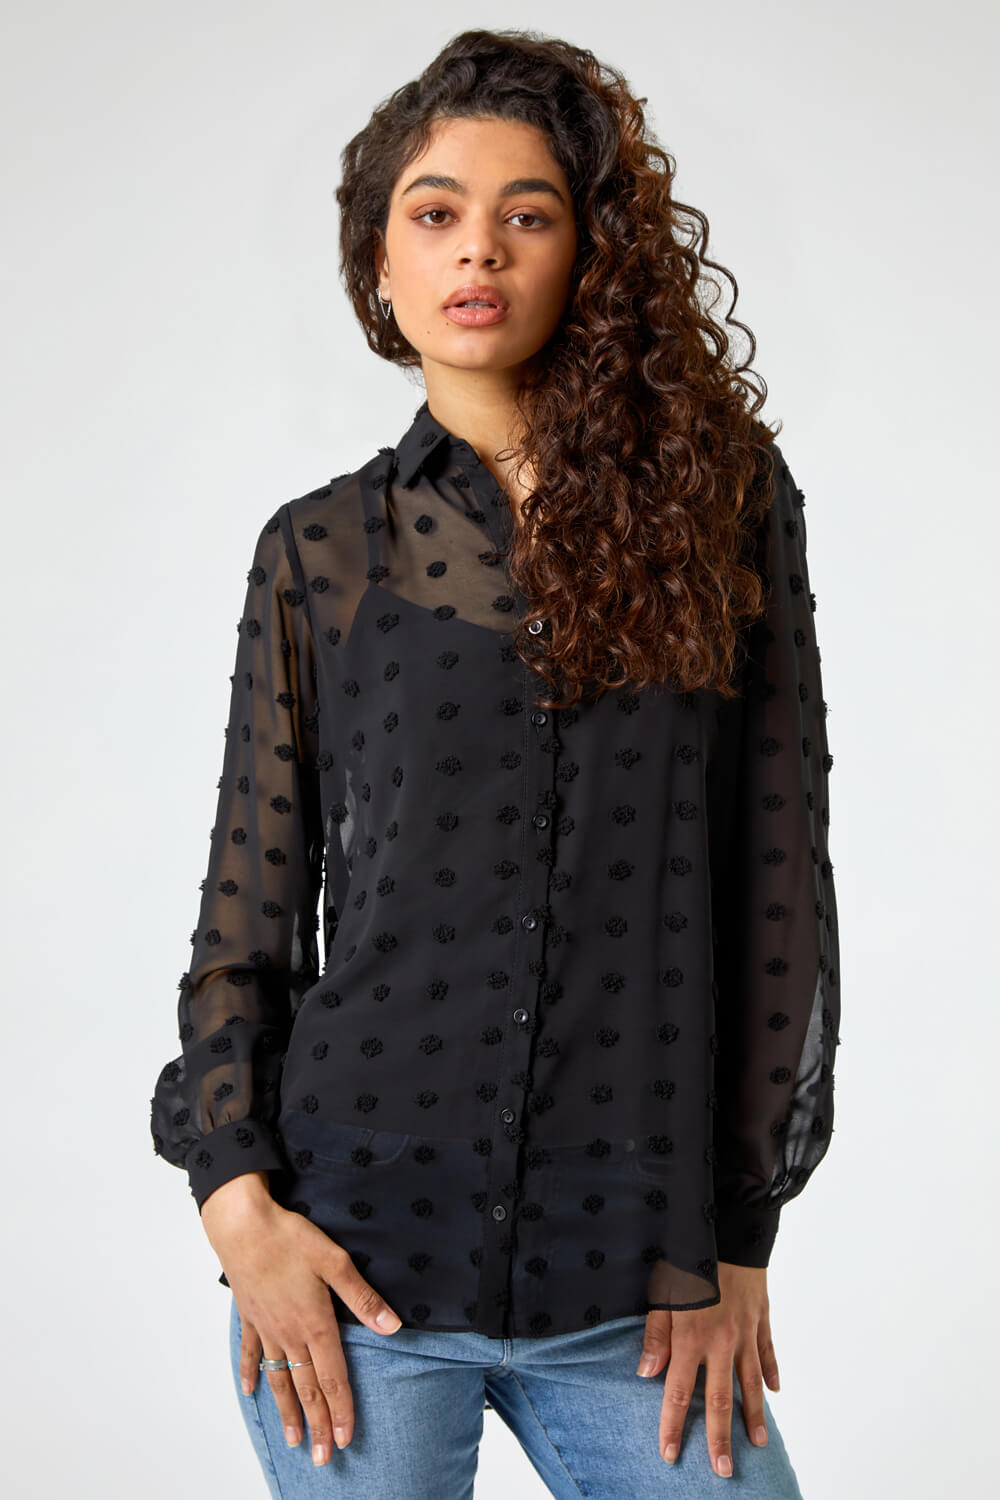 Black Textured Spot Button Up Blouse, Image 2 of 5